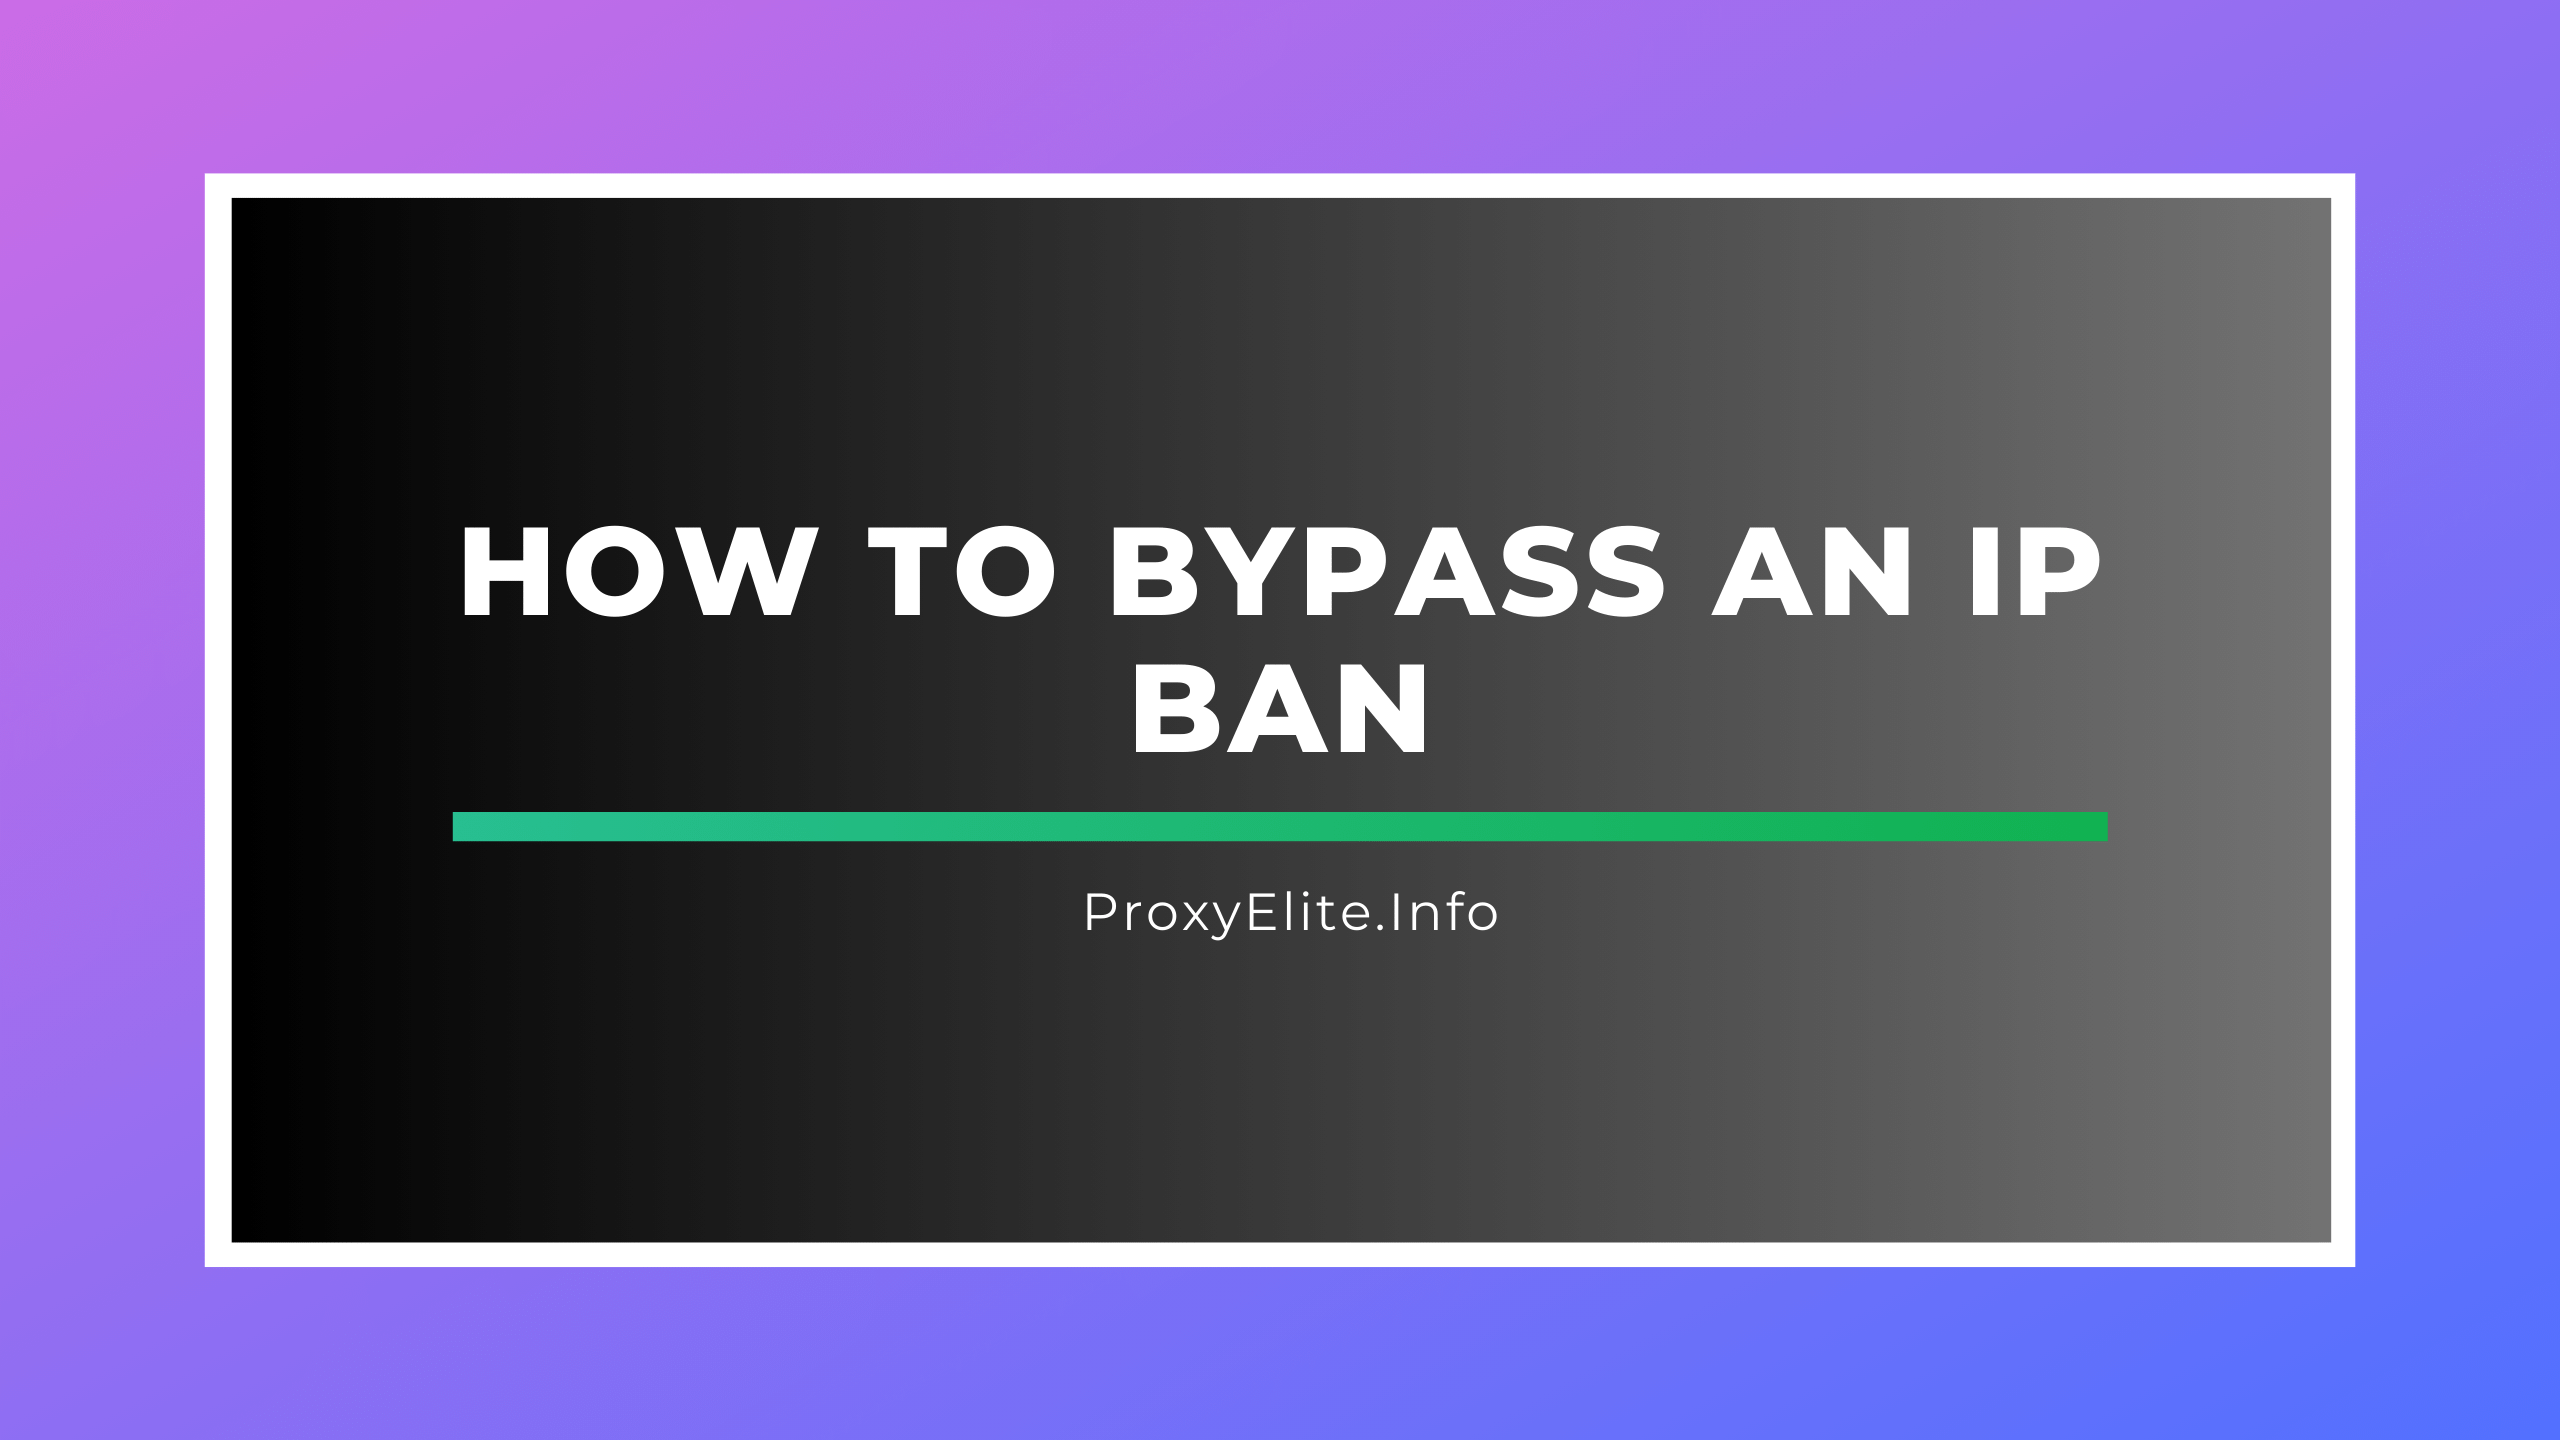 How to Bypass an IP Ban